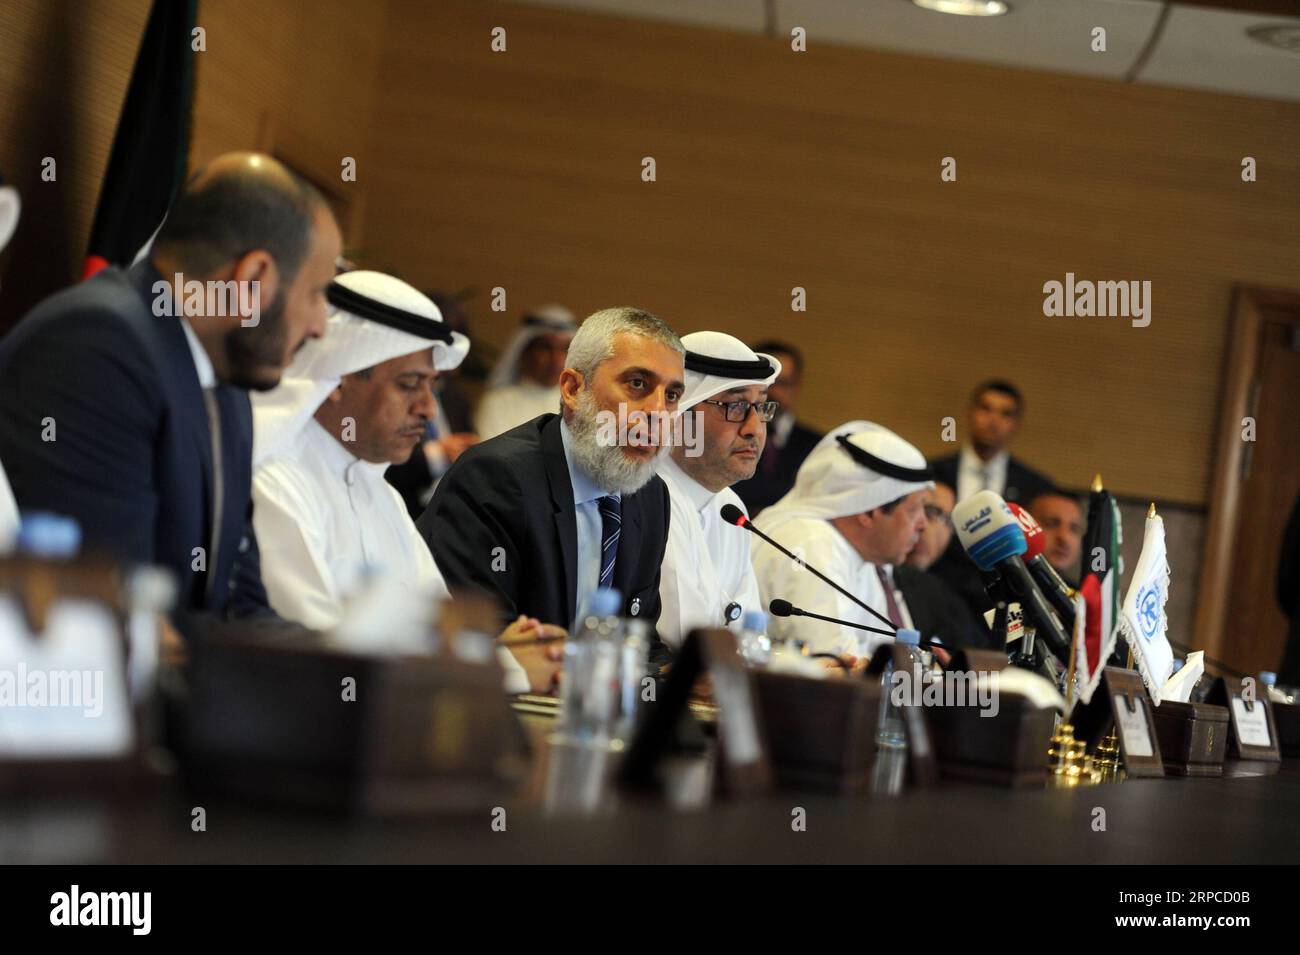 (190701) -- AL AHMADI GOVERNORATE, July 1, 2019 -- Kuwait Oil Company (KOC) CEO Emad Al-Sultan (3rd L) speaks at a press conference in Al Ahmadi Governorate, Kuwait, July 1, 2019. KOC on Monday signed a contract worth 181 million Kuwaiti dinars (597 million U.S. dollars) for offshore drilling with U.S. oil field service company Halliburton. KUWAIT-AL AHMADI GOVERNORATE-KOC-CONTRACT SIGNING NiexYunpeng PUBLICATIONxNOTxINxCHN Stock Photo